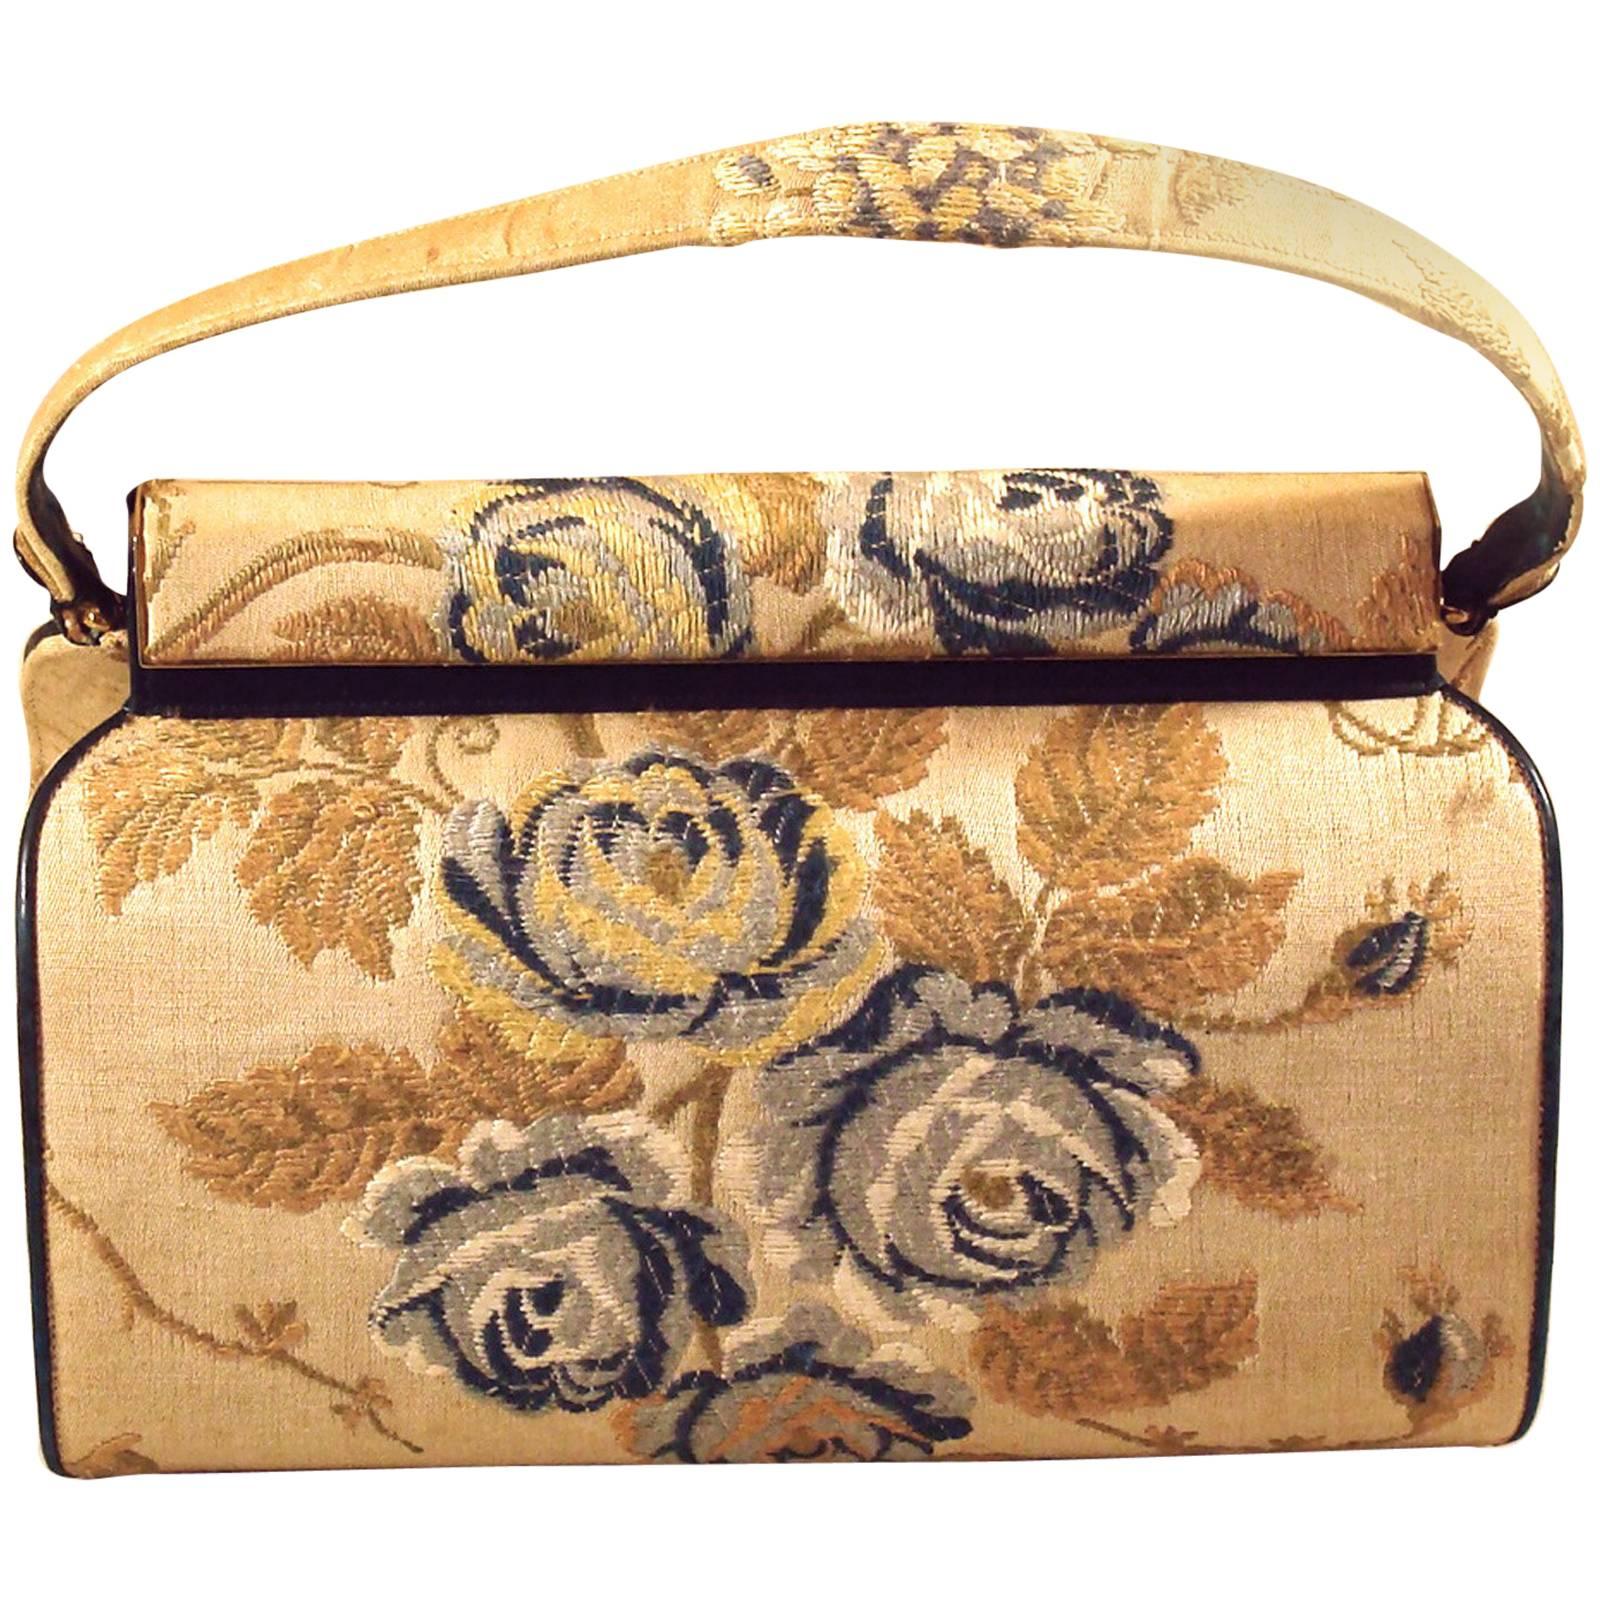 Rare Structured Purse in Floral, Embroidered Fabric by Nettie Rosenstein